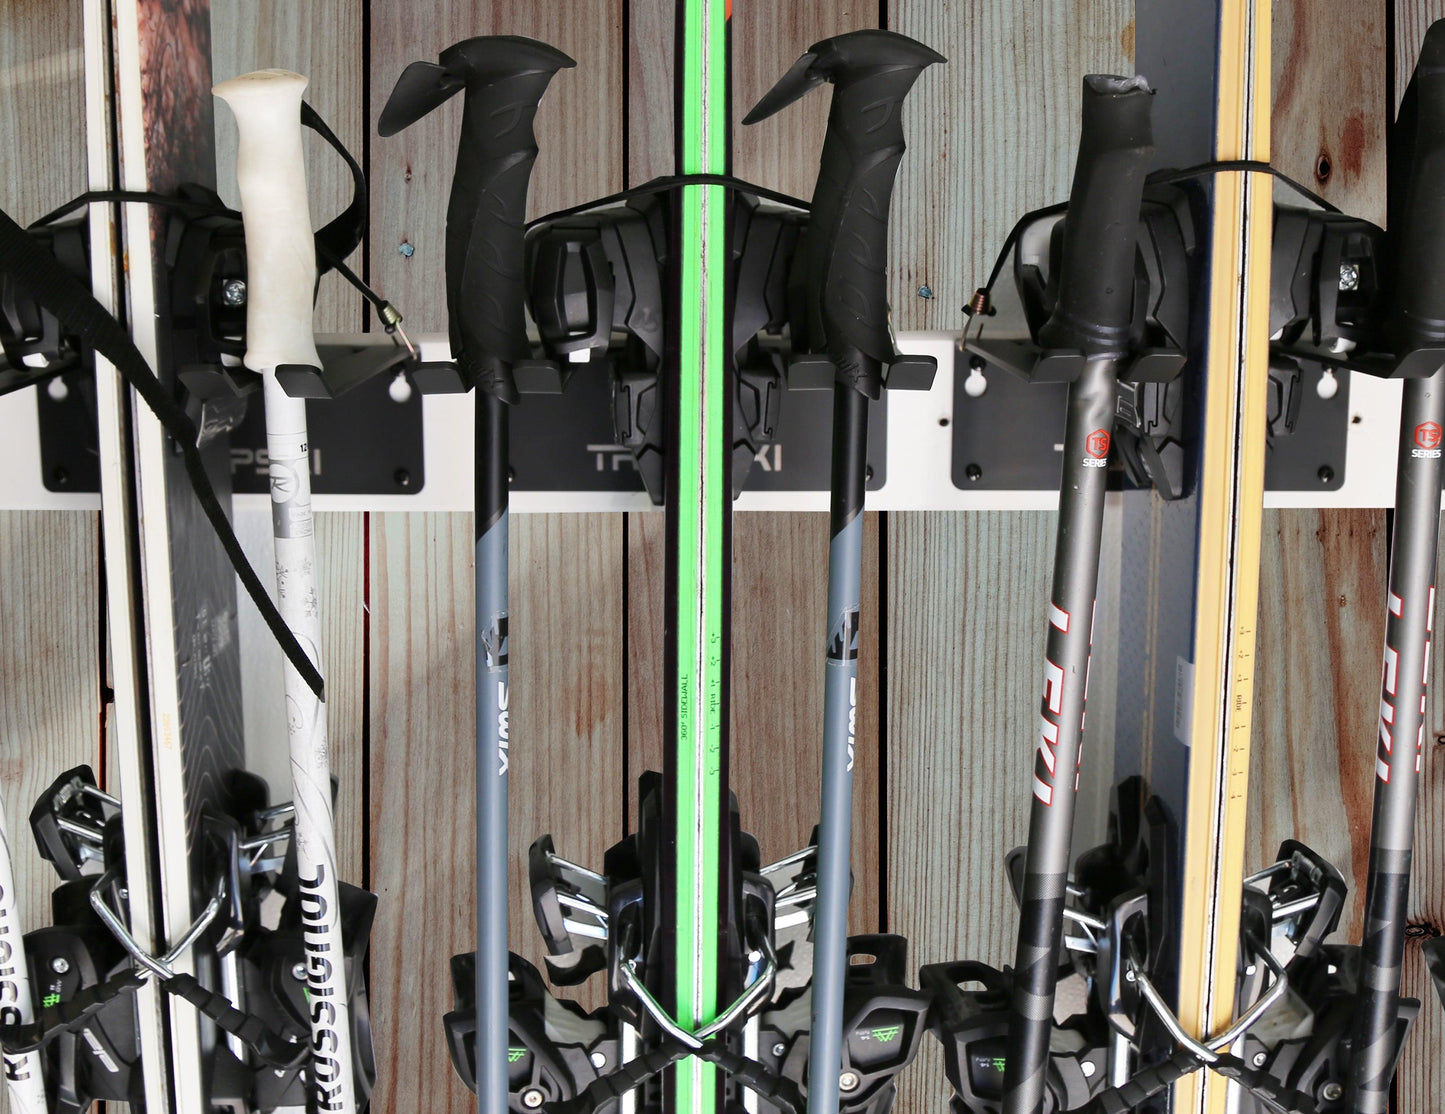 TRAPAWAY Wall Rack | Garage Organizer for Yard Tools, Gear & Equipment | Holds Skis or Snowboard by Bindings | Aluminum | No Moving Parts to break or pinch points - TRAPSKI, LLC